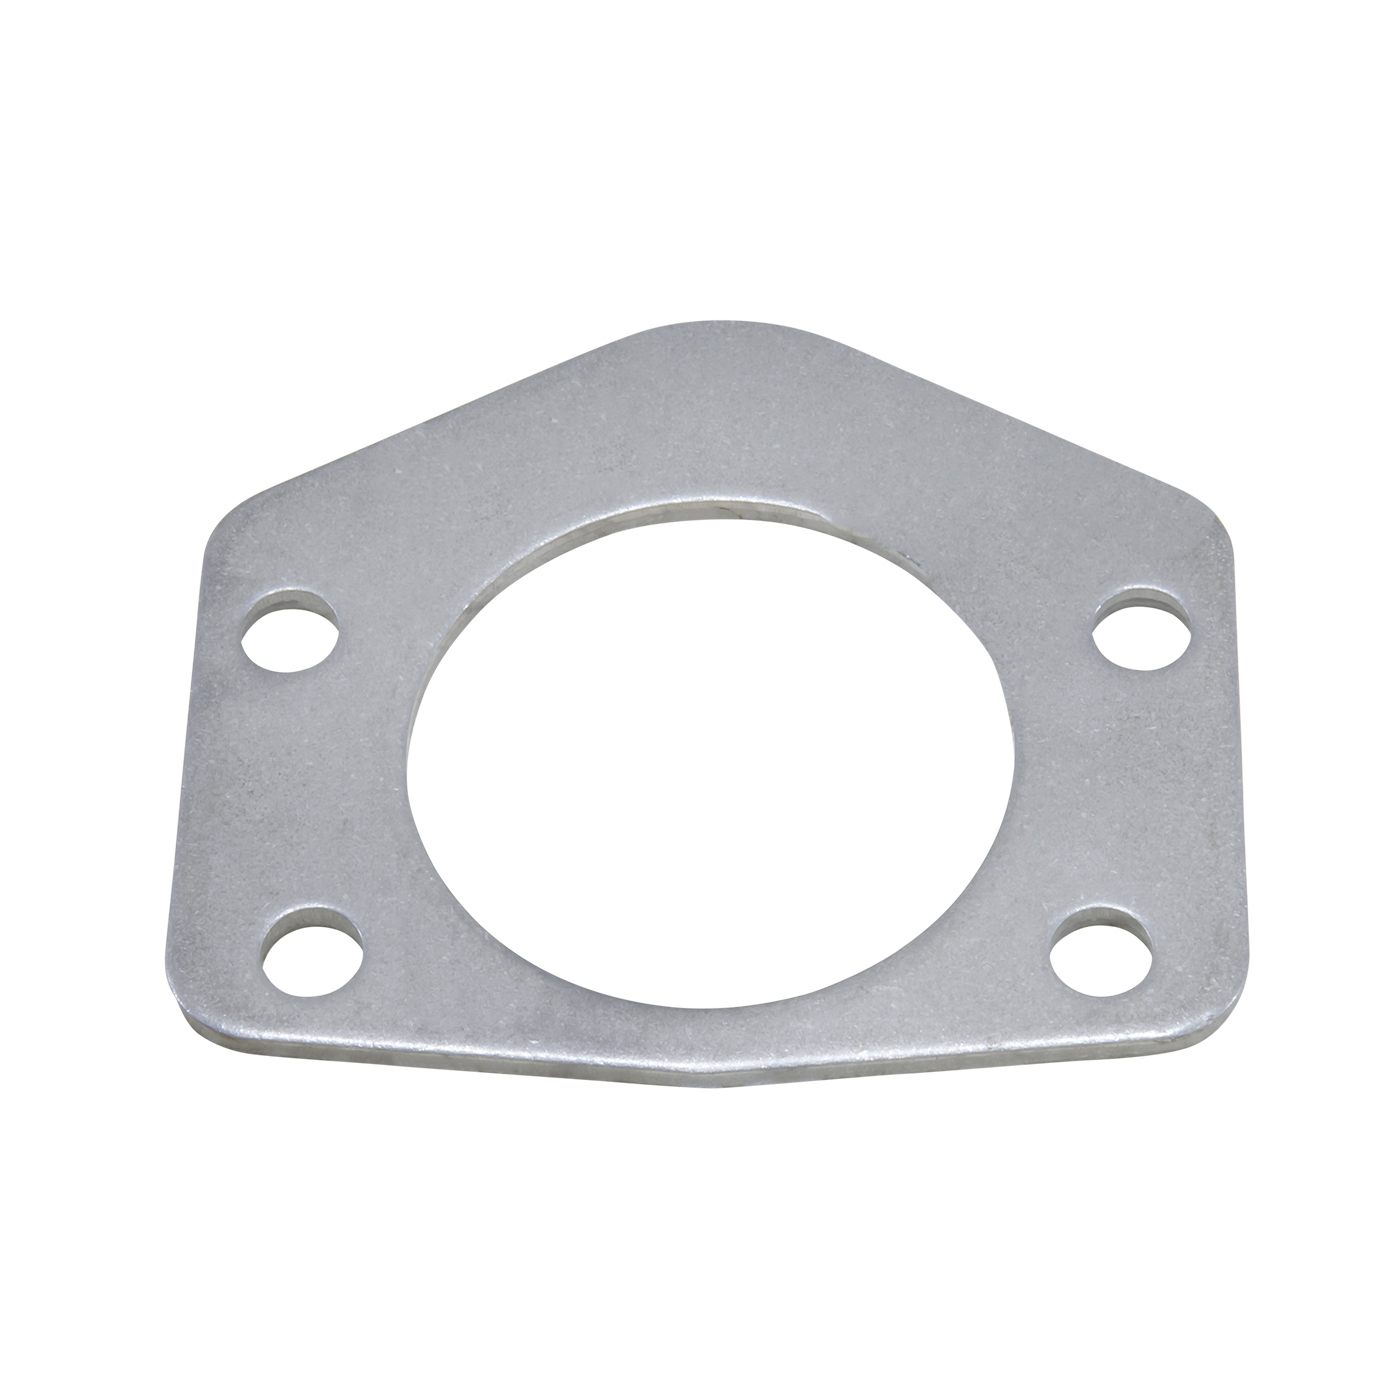 Axle bearing retainer plate for Dana 44 TJ rear 